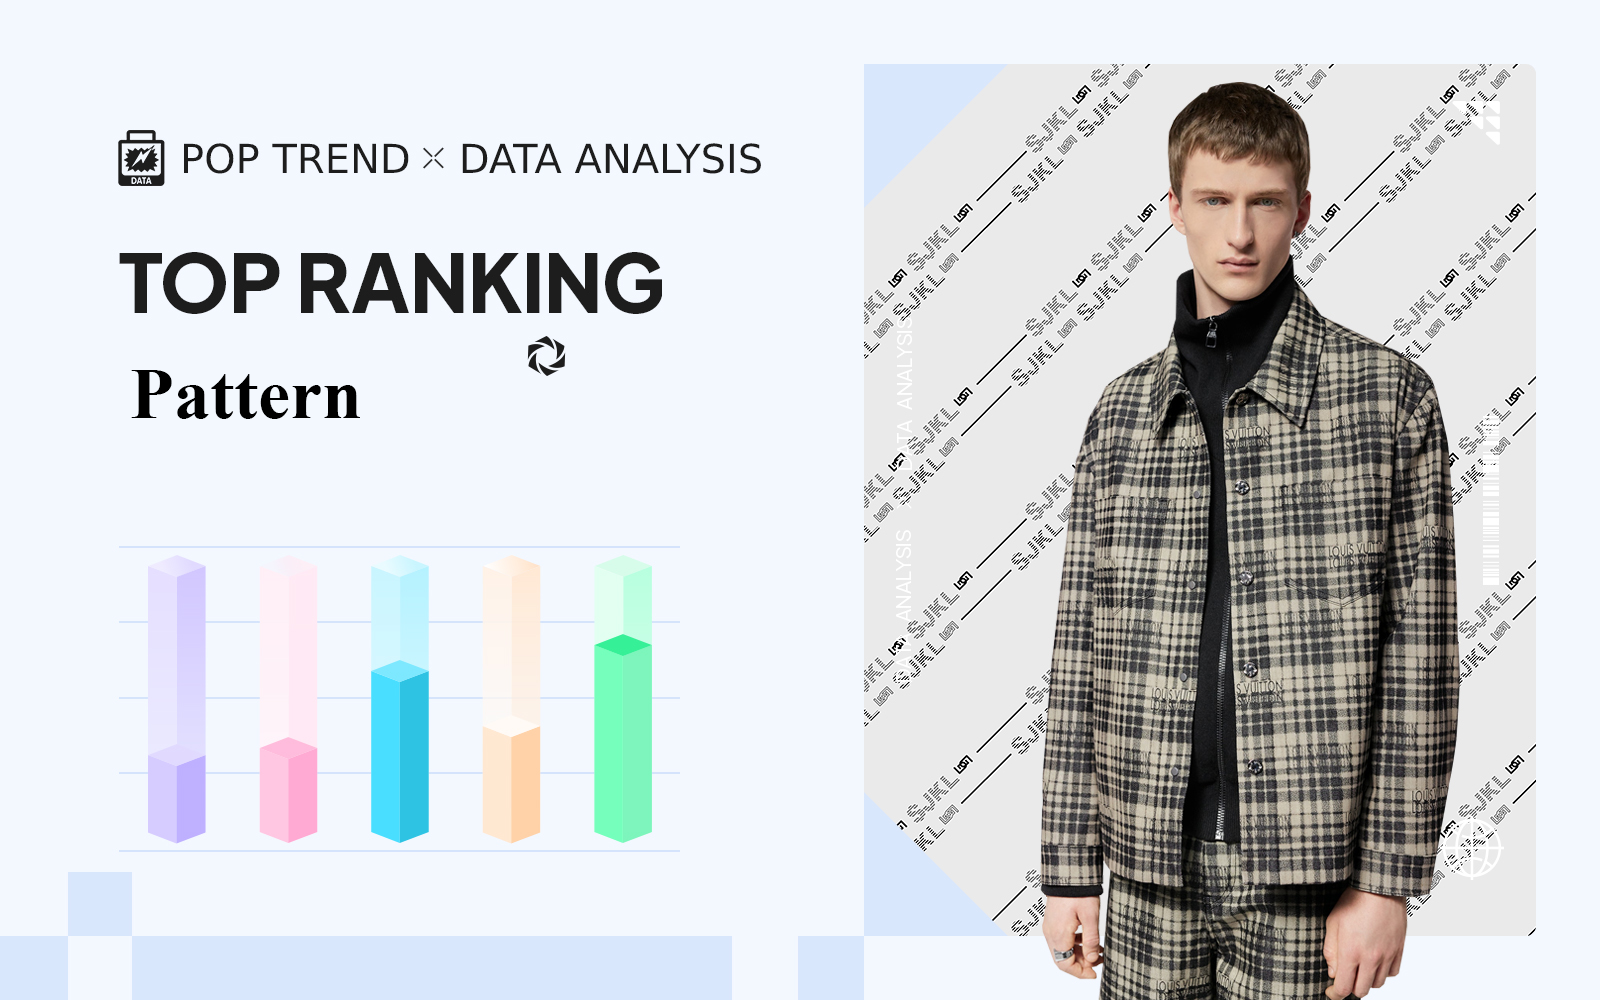 Allover Pattern -- The TOP Ranking of Menswear